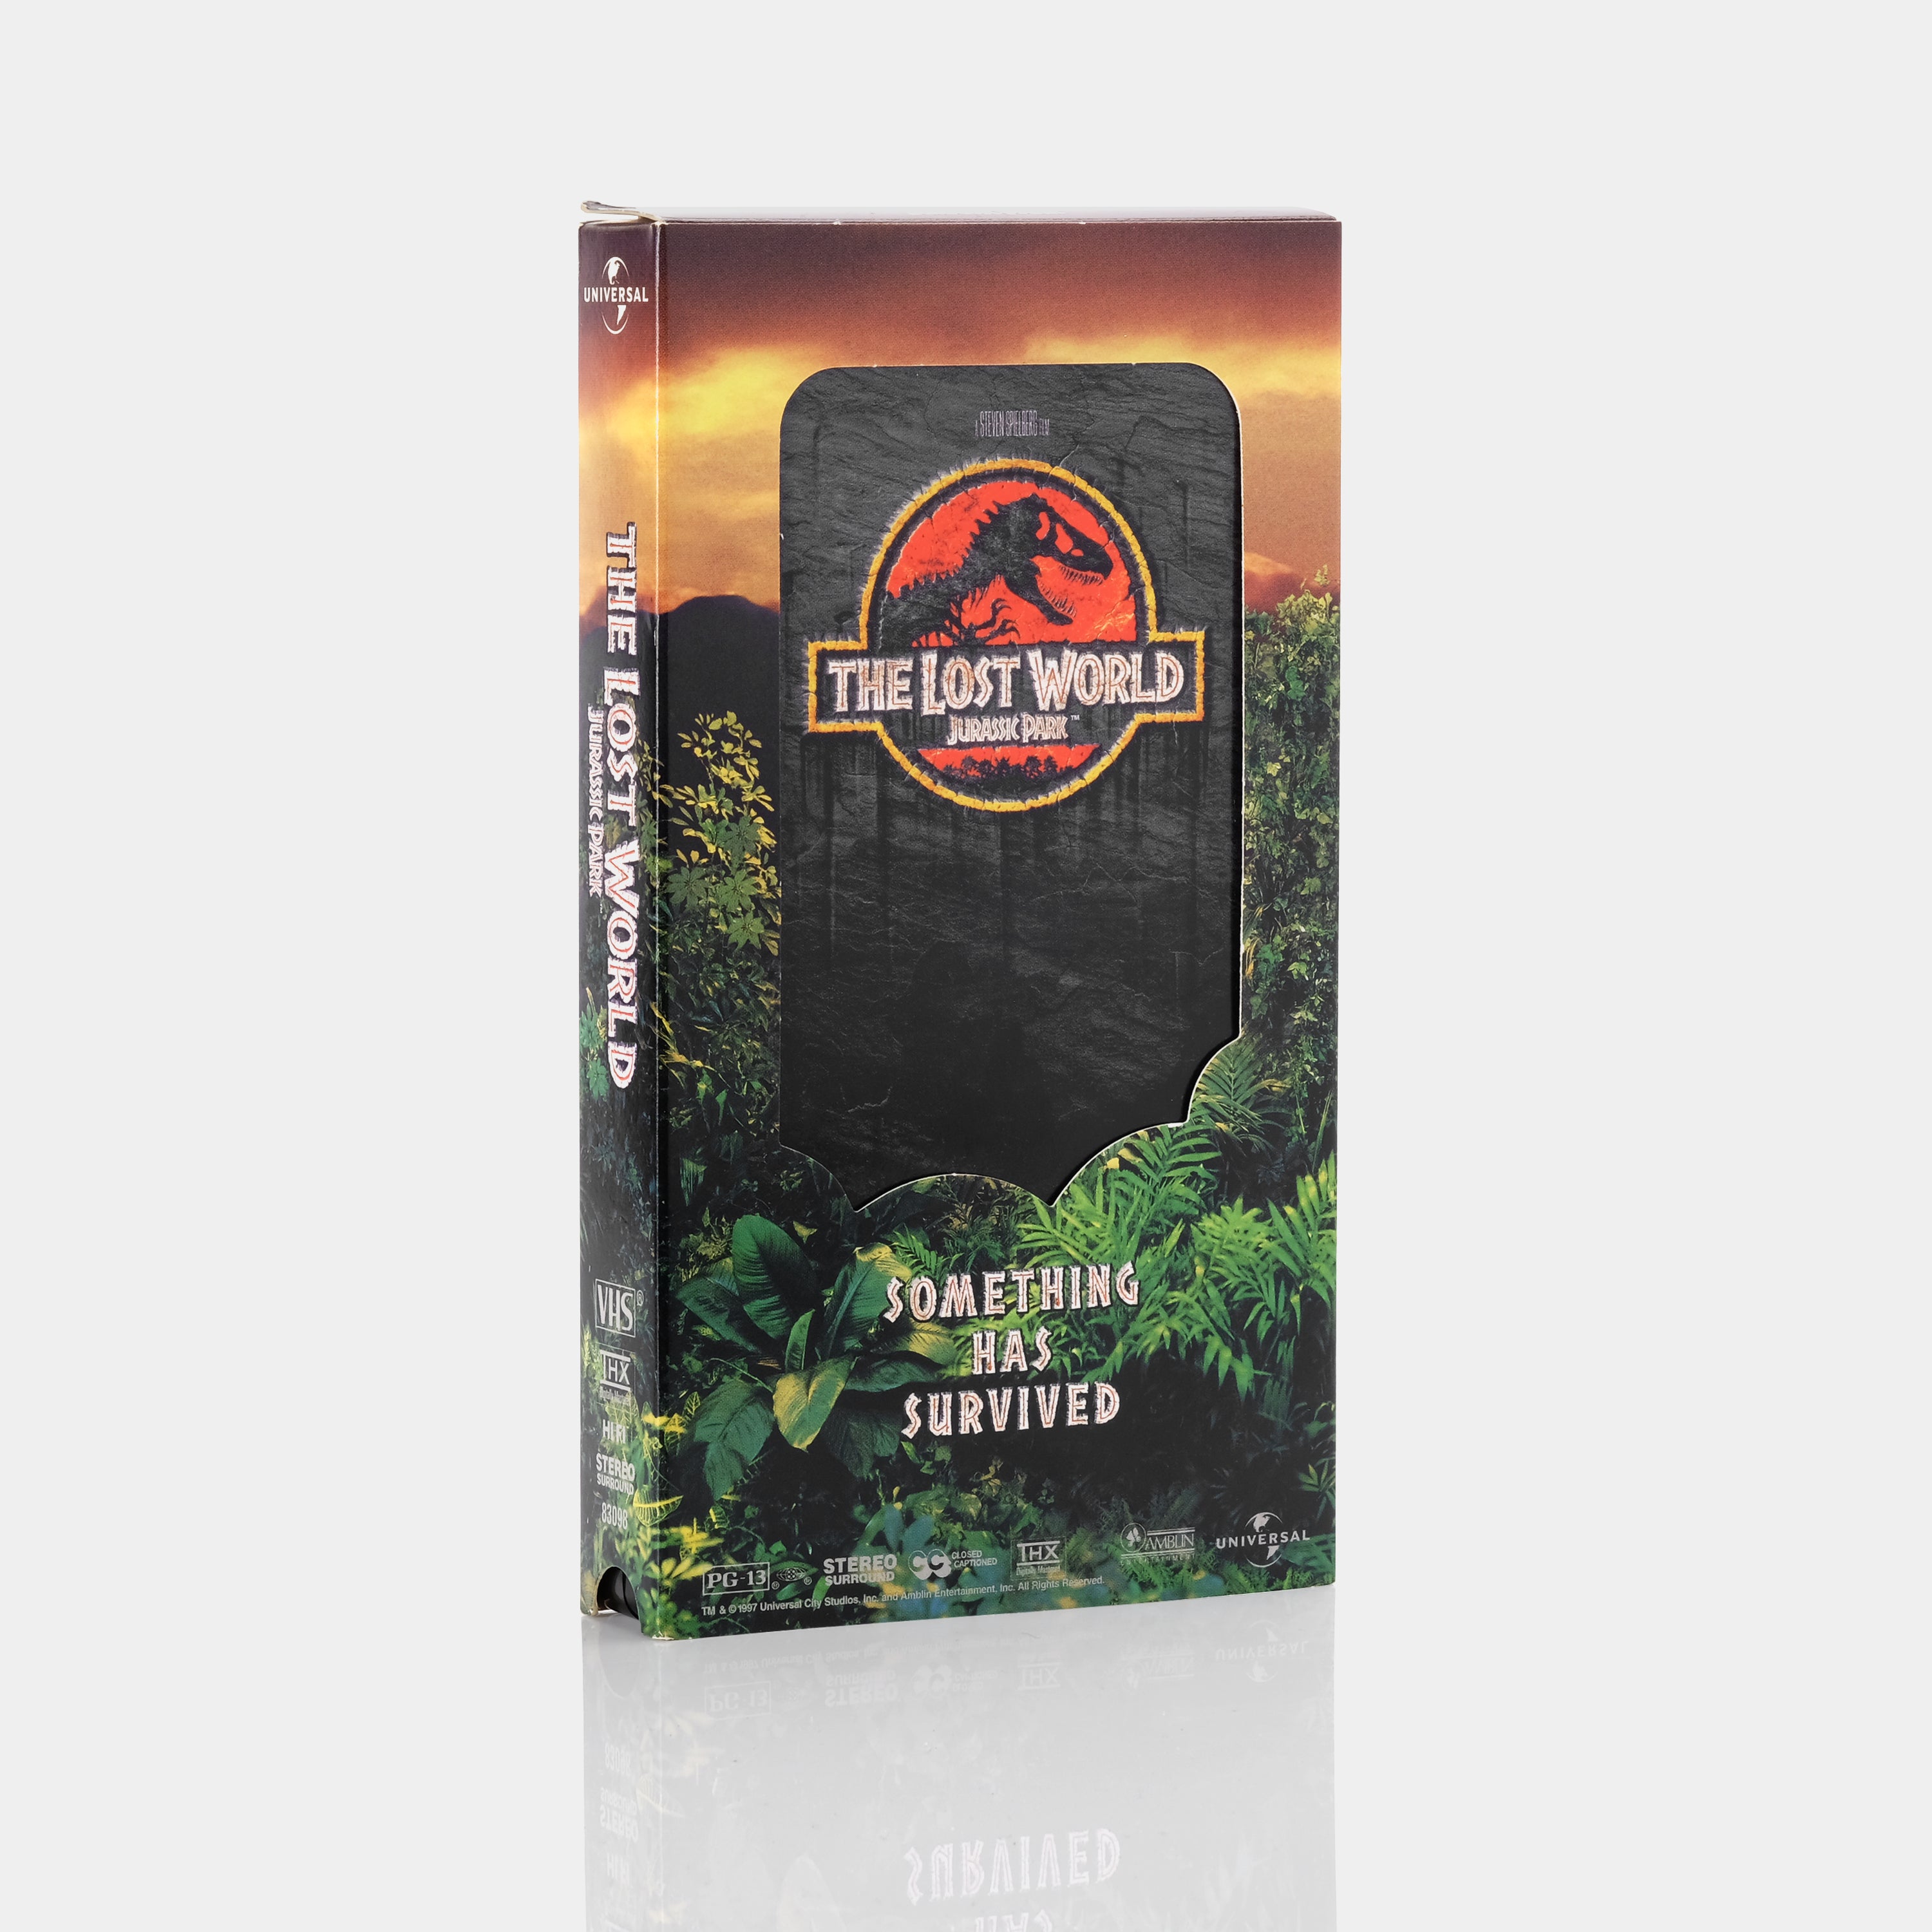 The Lost World: Jurassic Park VHS Tape